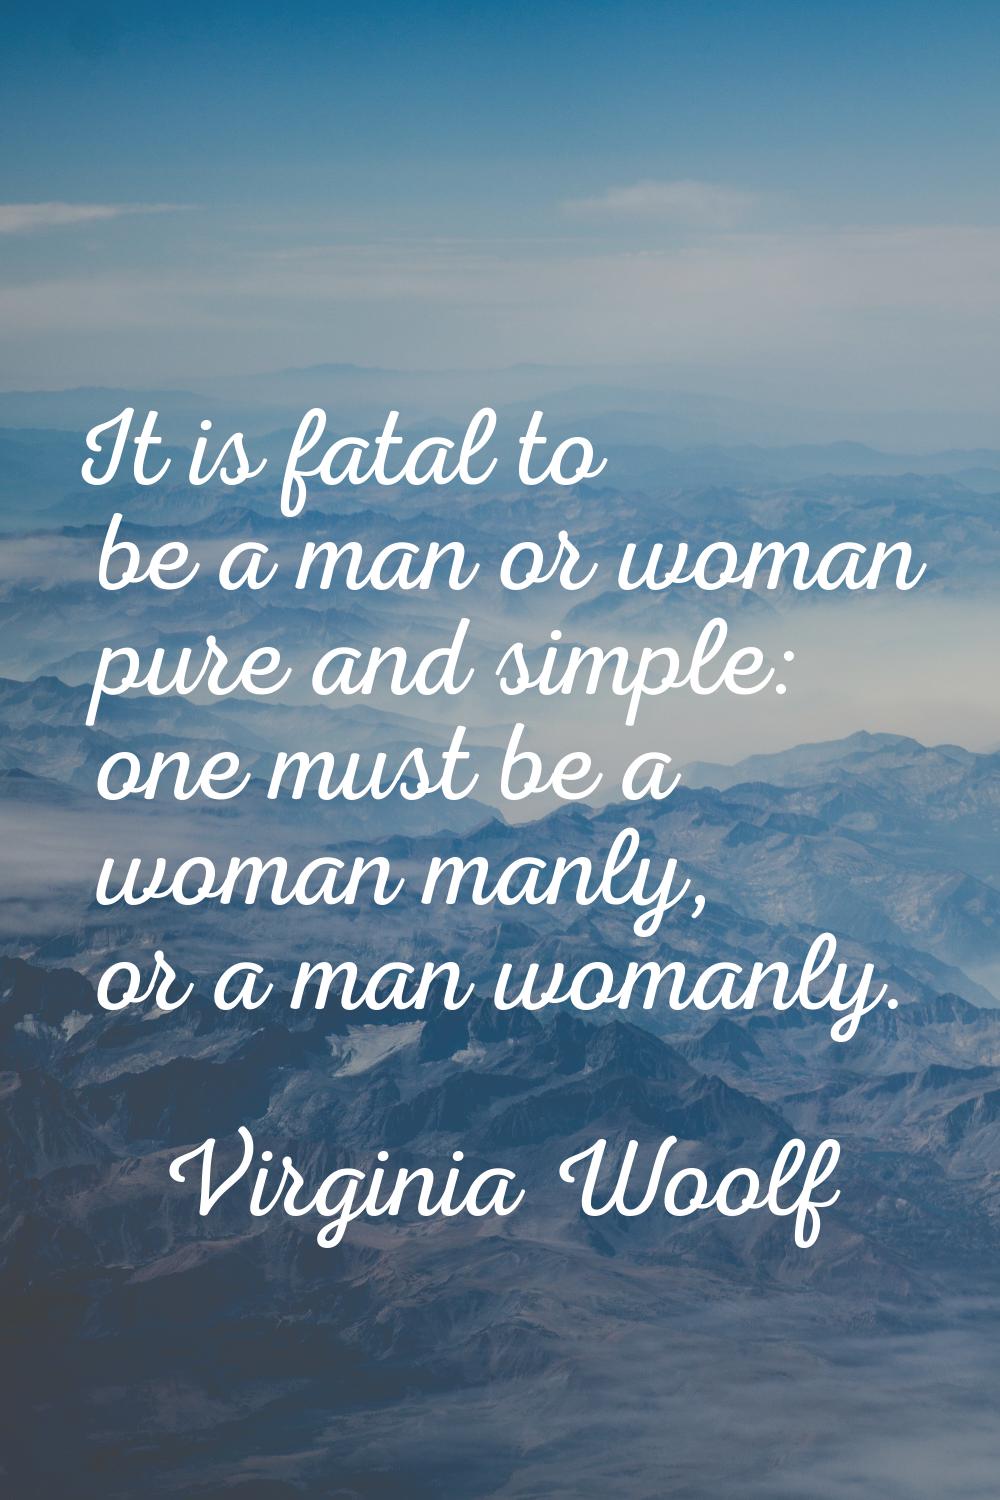 It is fatal to be a man or woman pure and simple: one must be a woman manly, or a man womanly.